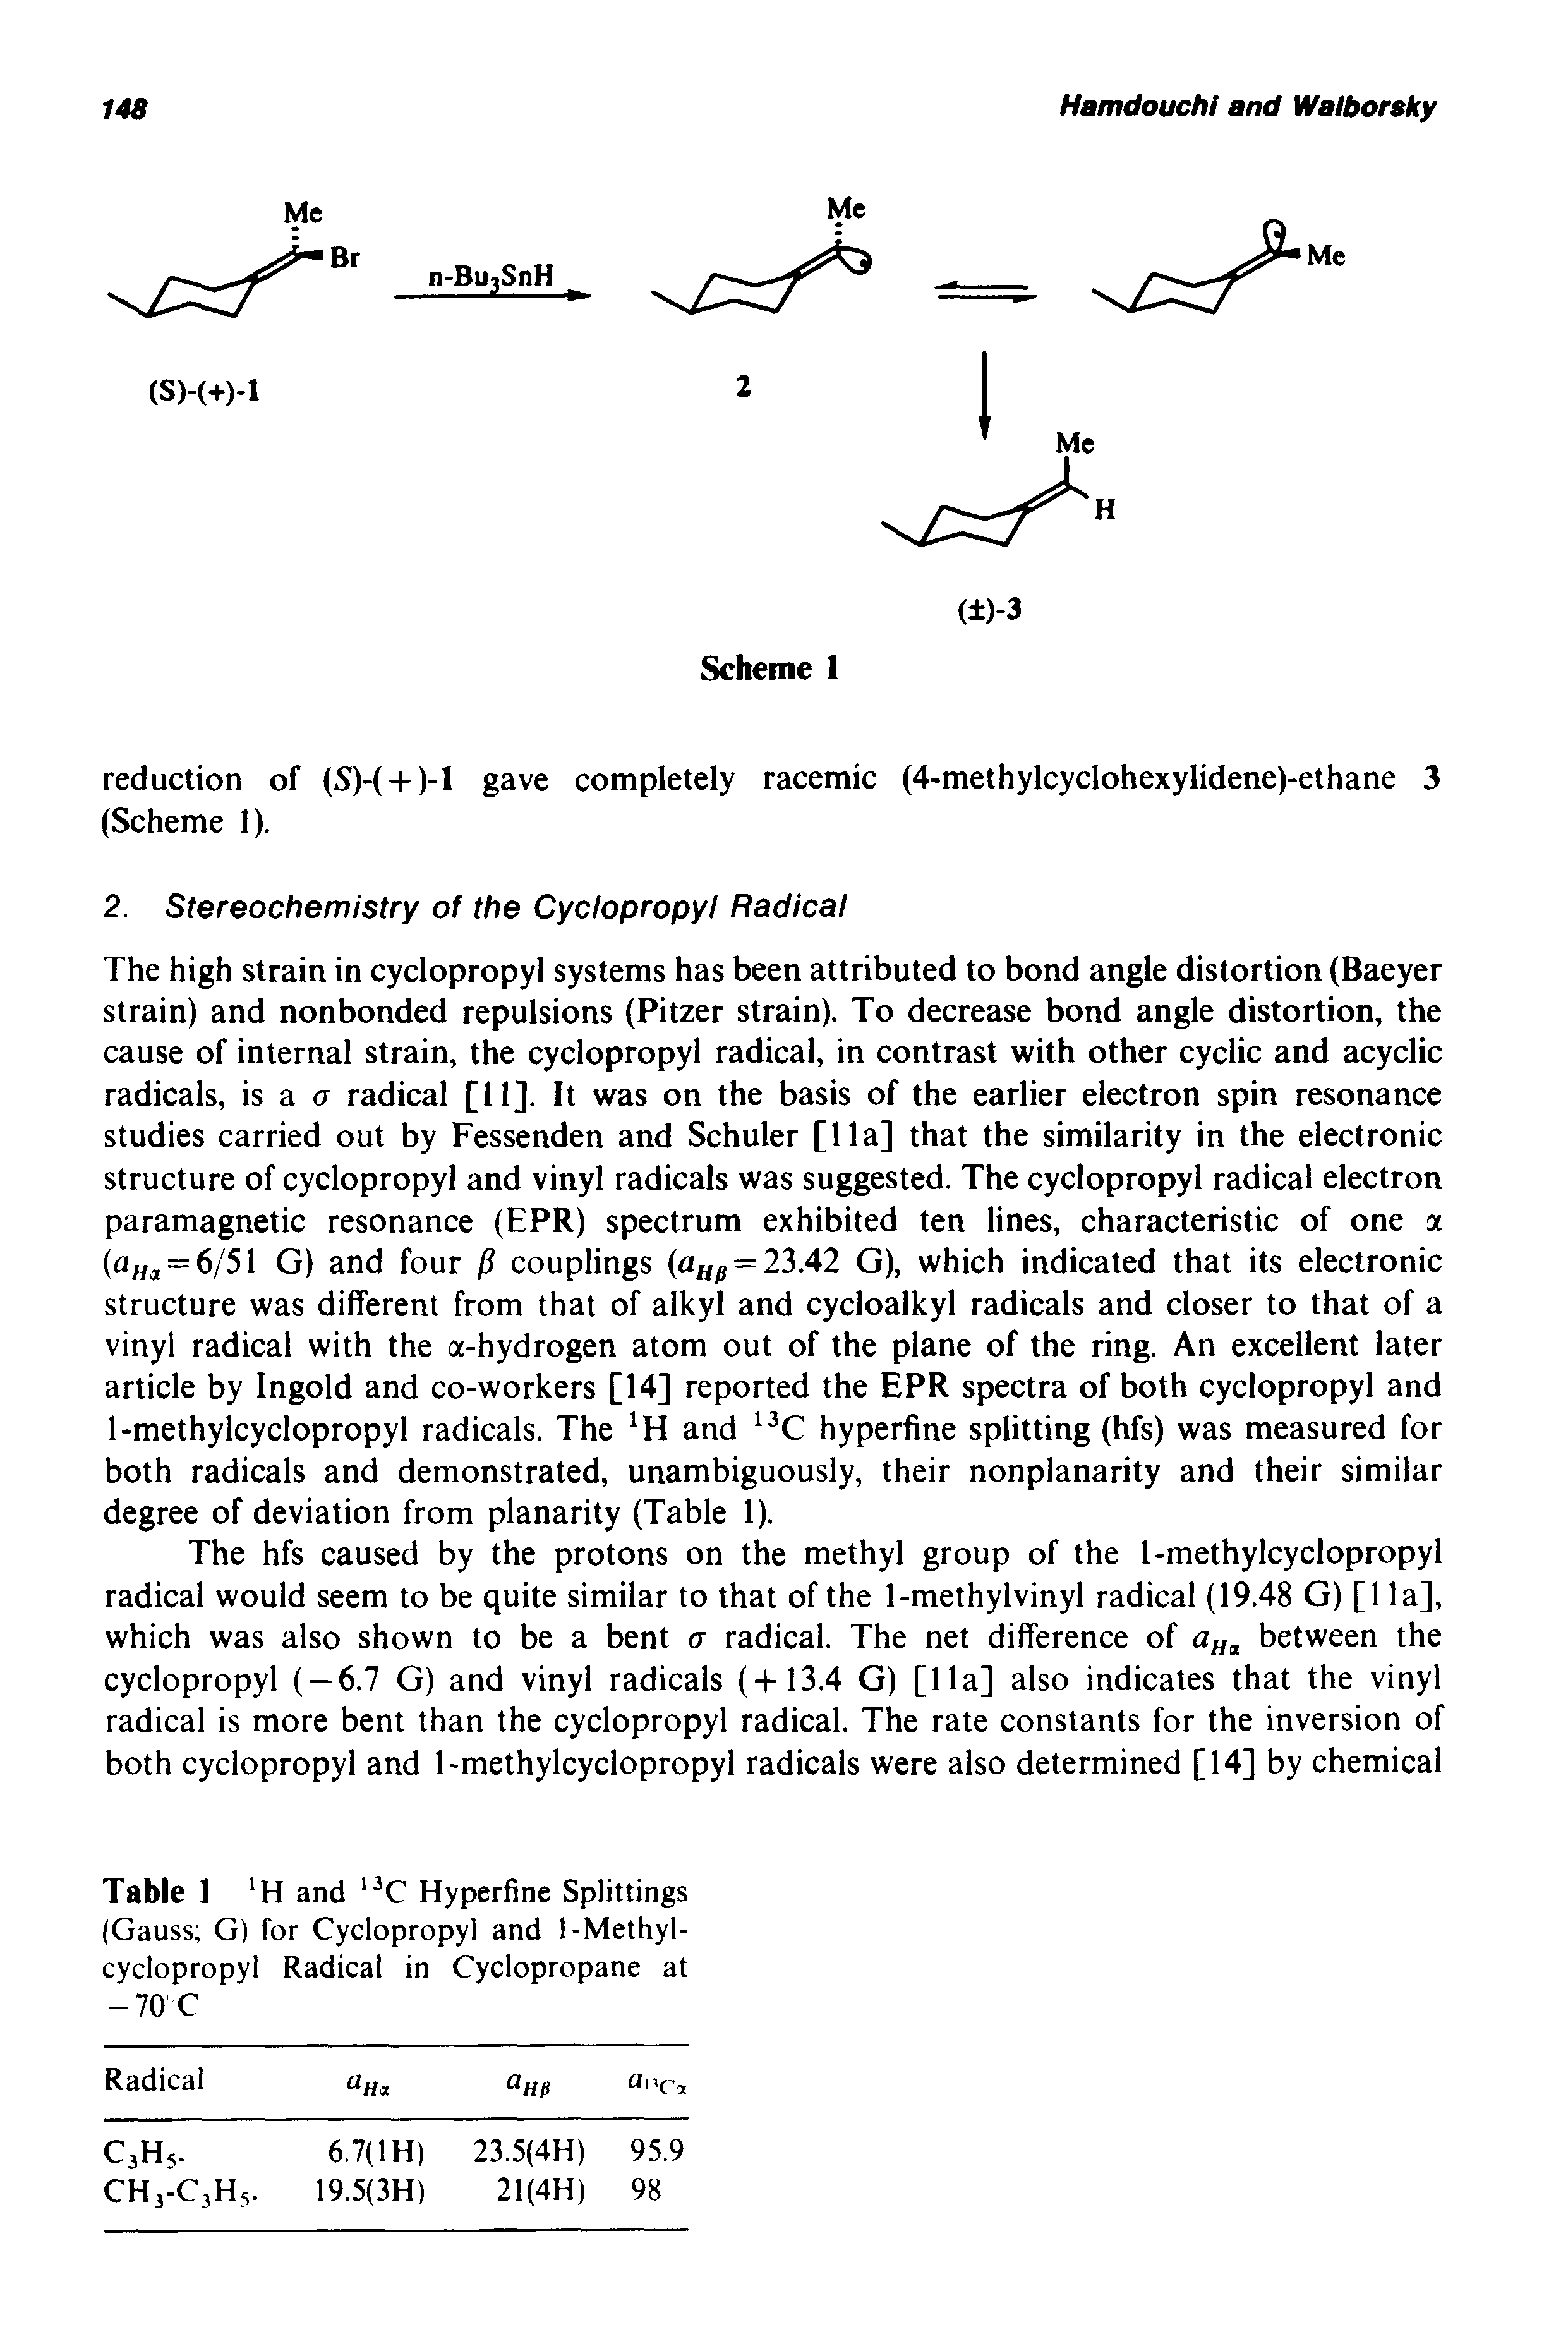 Table I H and C Hyperfine Splittings (Gauss G) for Cyclopropyl and 1-Methyl-cyclopropyl Radical in Cyclopropane at -70 C...